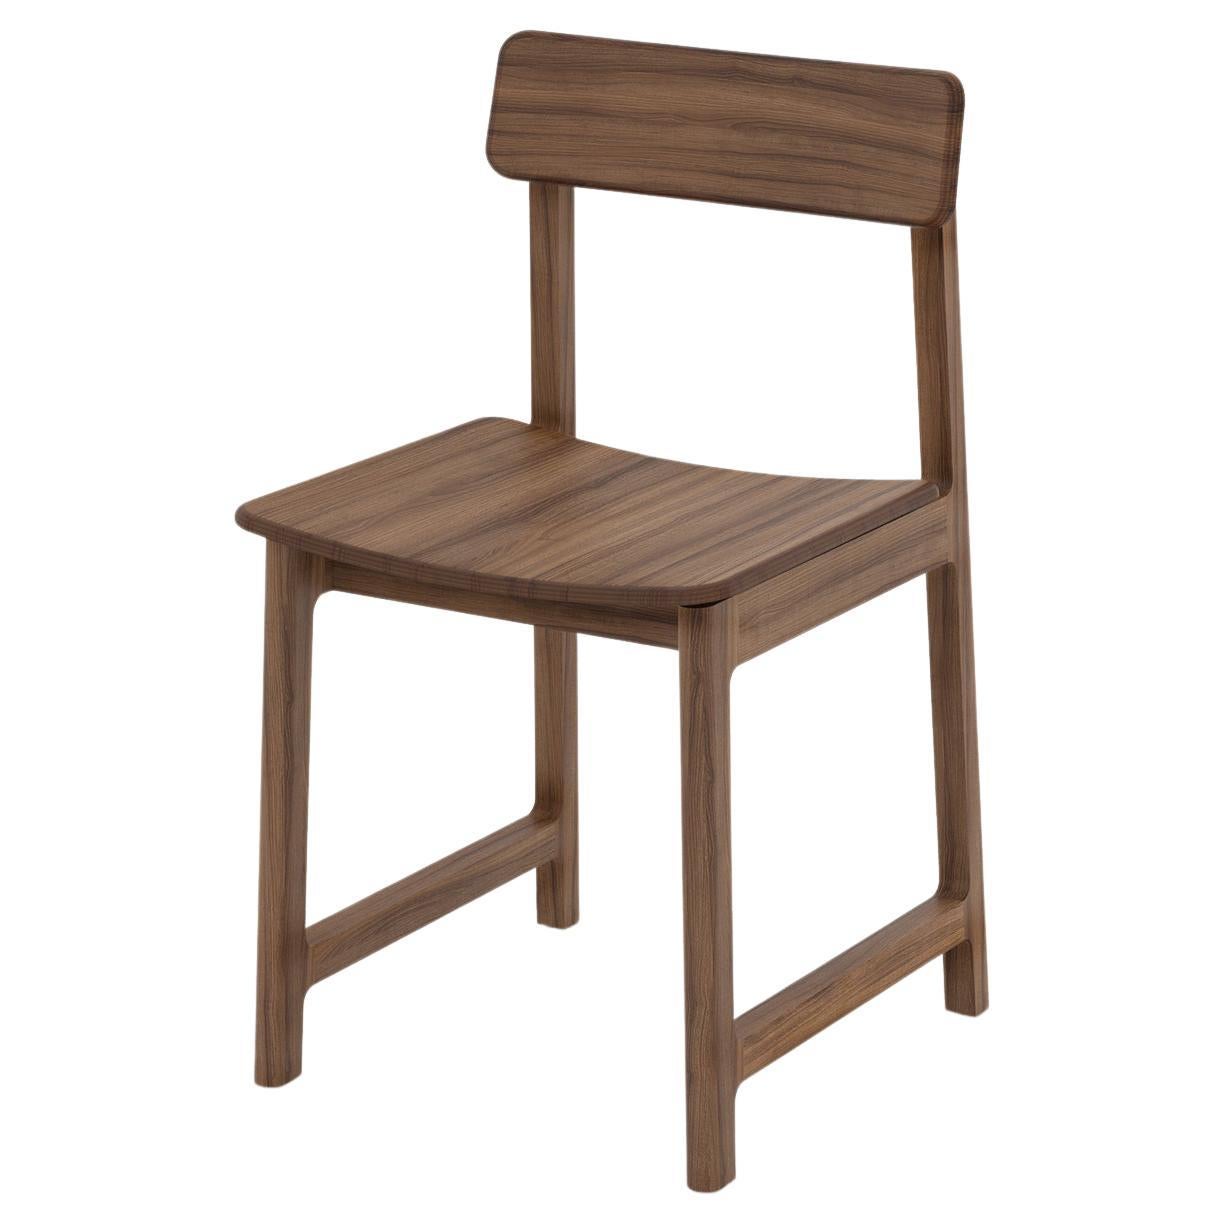 Minimalist Modern Chair in Walnut Wood Frame Collection For Sale